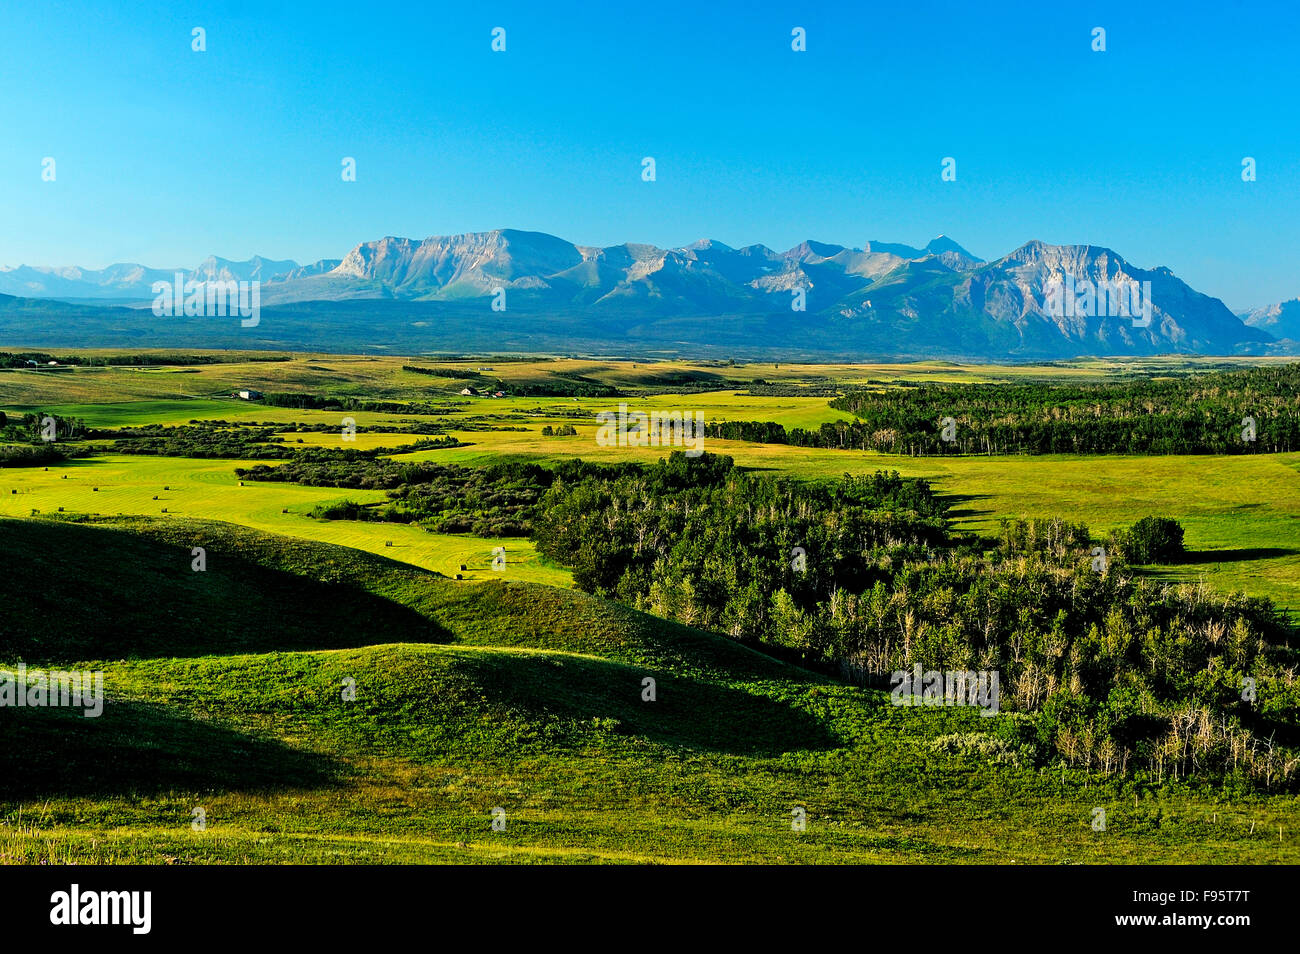 A summer landscape image showing the wide expanding view of Alberta ranchland running up to the base of the Rockey Mountains of Stock Photo